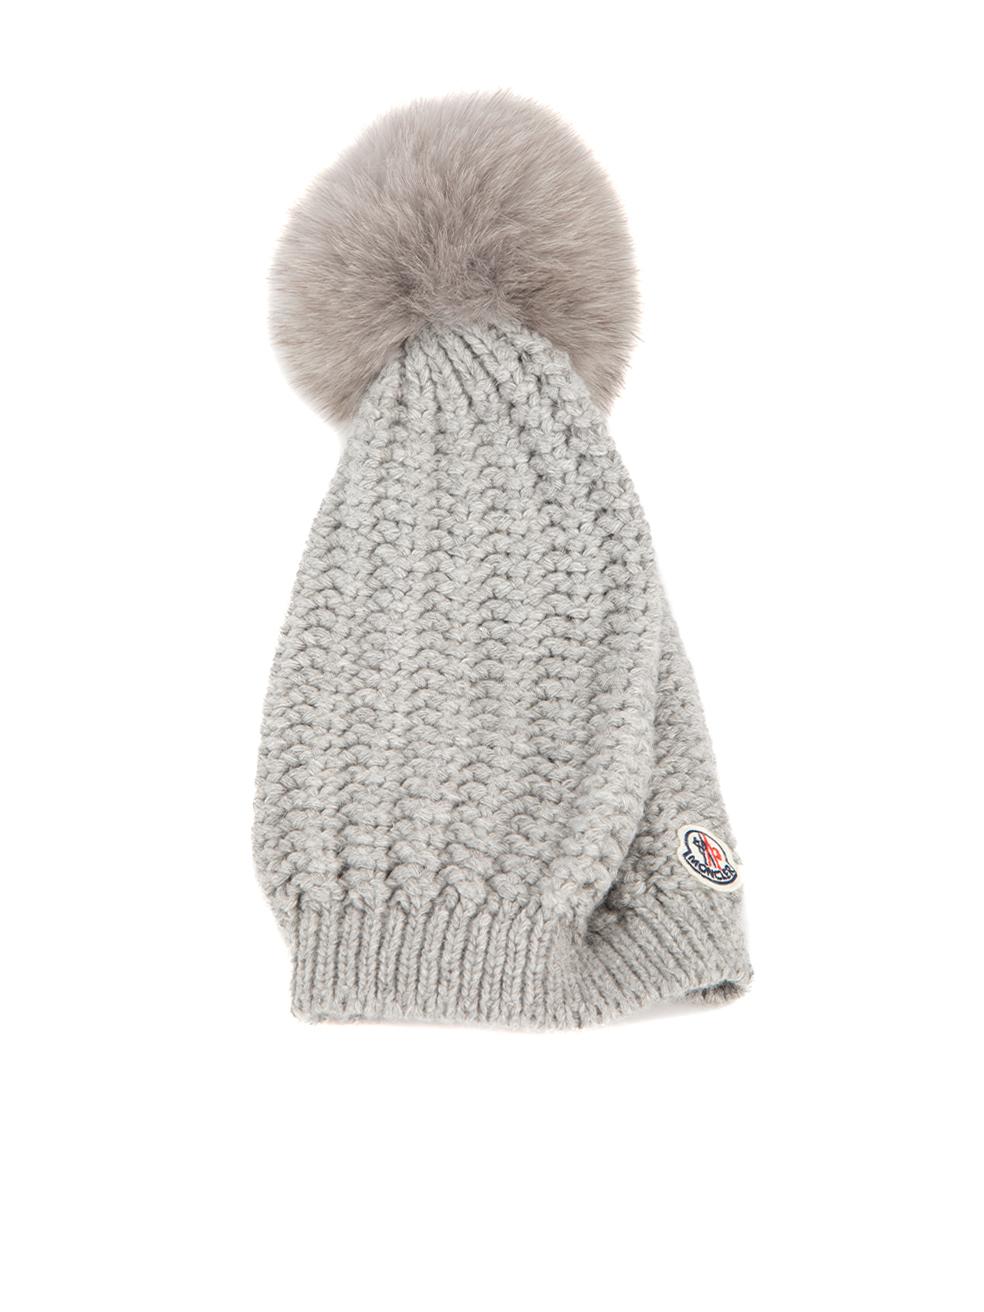 CONDITION is Very good. Hardly any visible wear to beanie is evident on this used Moncler designer resale item. 
 
 Details
  Grey
 Wool
 Knit beanie
 Fox fur pompom accent
 Stretchy
 
 
 Made in Italy
 
 Composition
 40% Wool, 25% Polyamide, 25%